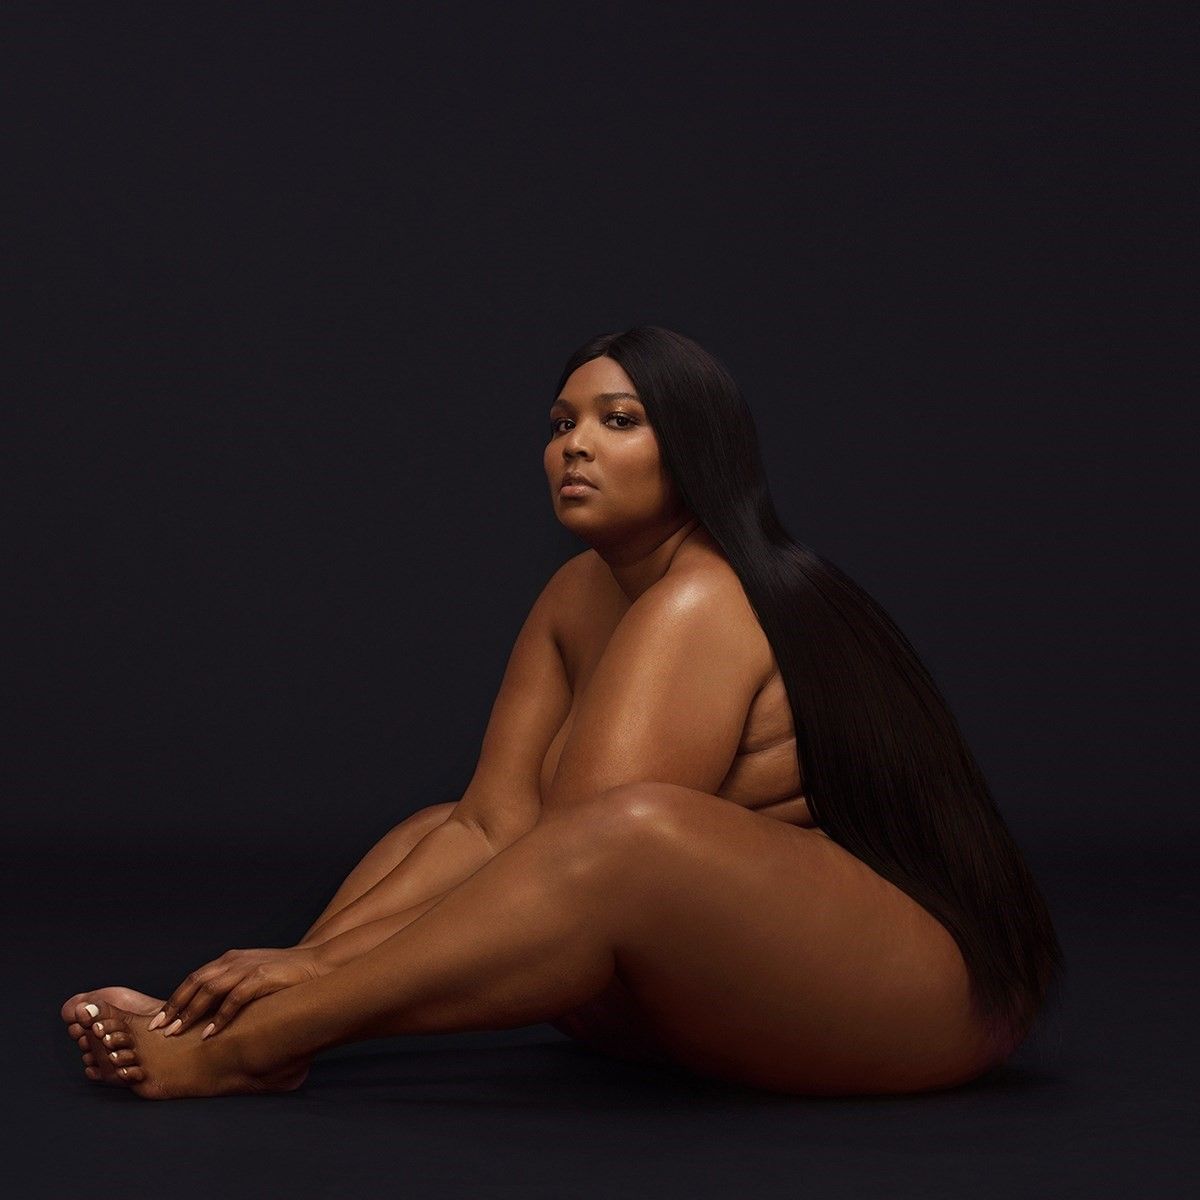 Self -Love :Singer Lizzo Takes On Body Positivity Through Both Music And Instagram